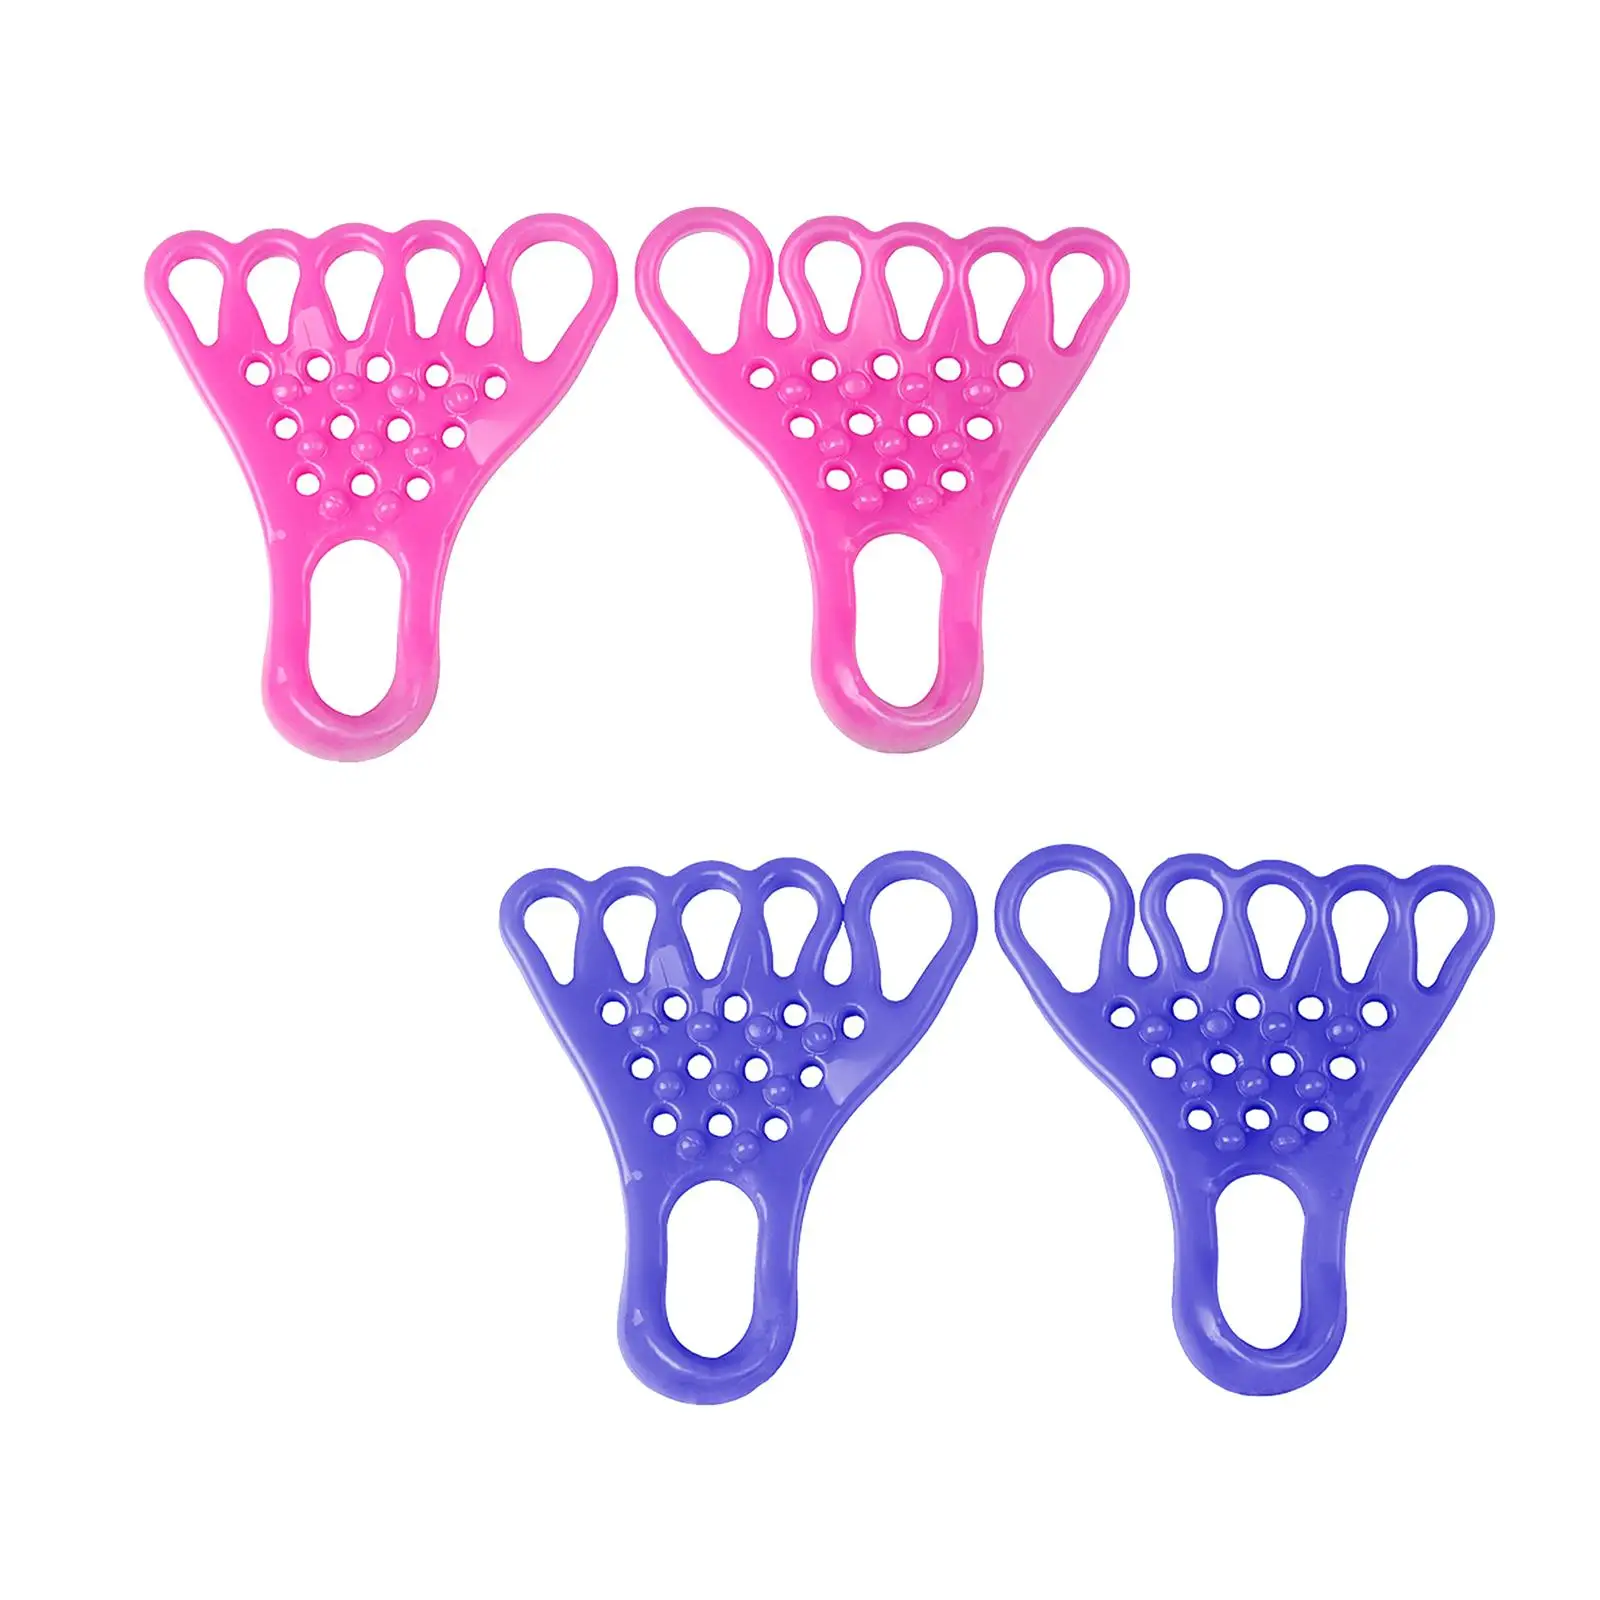 Toe Straightener Bunion Corrector Toe Protector Nail Tools Hammer Toe Splints for Overlapping Toes Bunions Curled Toes Women Men